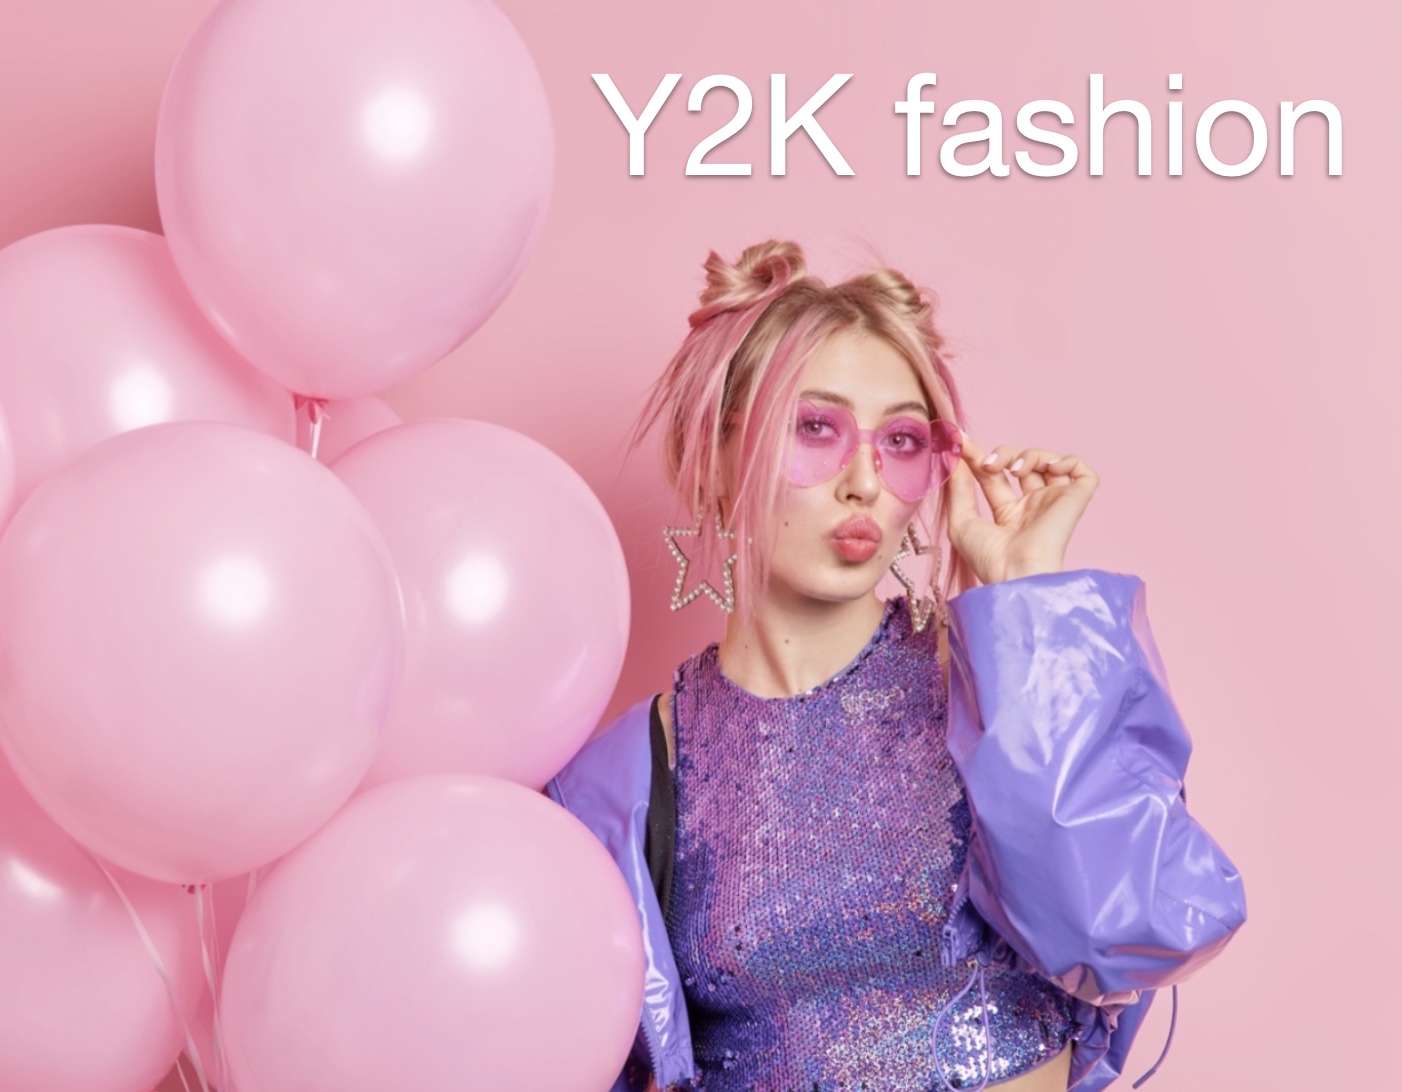 Y2K fashion - what is it and why is it so popular amongst men & women